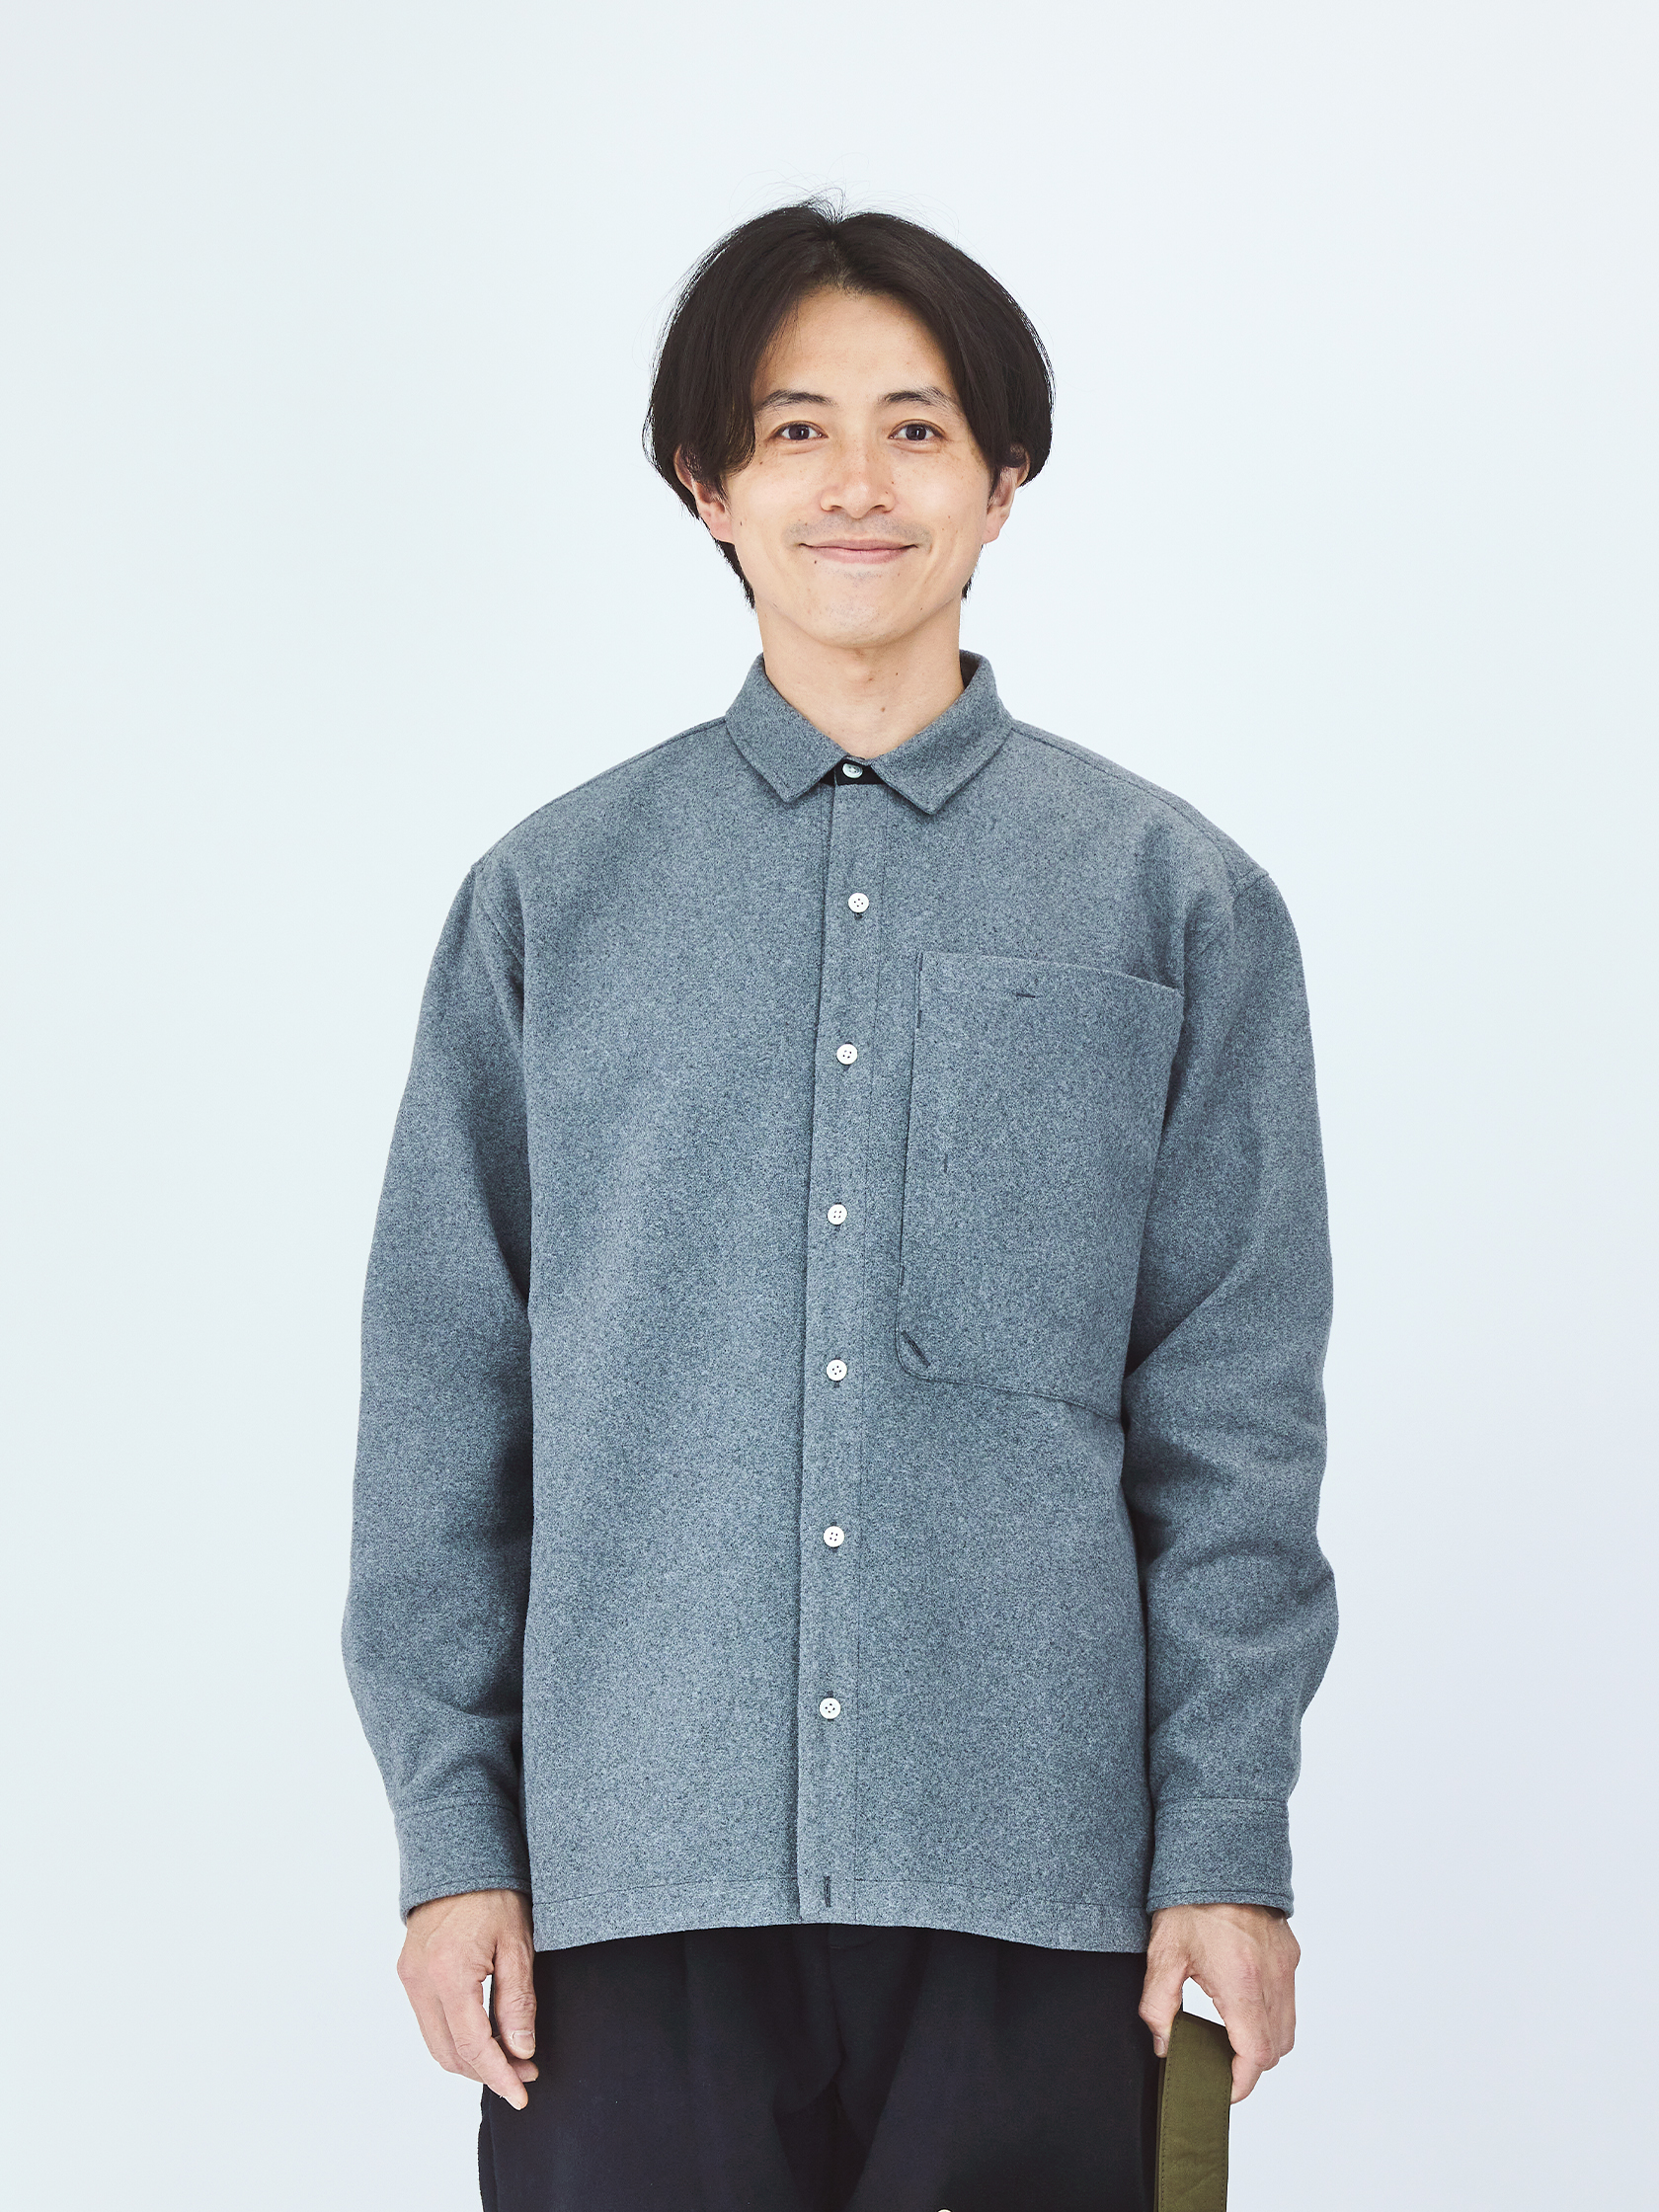 brushed woven L/S shirts | karrimor カリマー | リュックサック ...